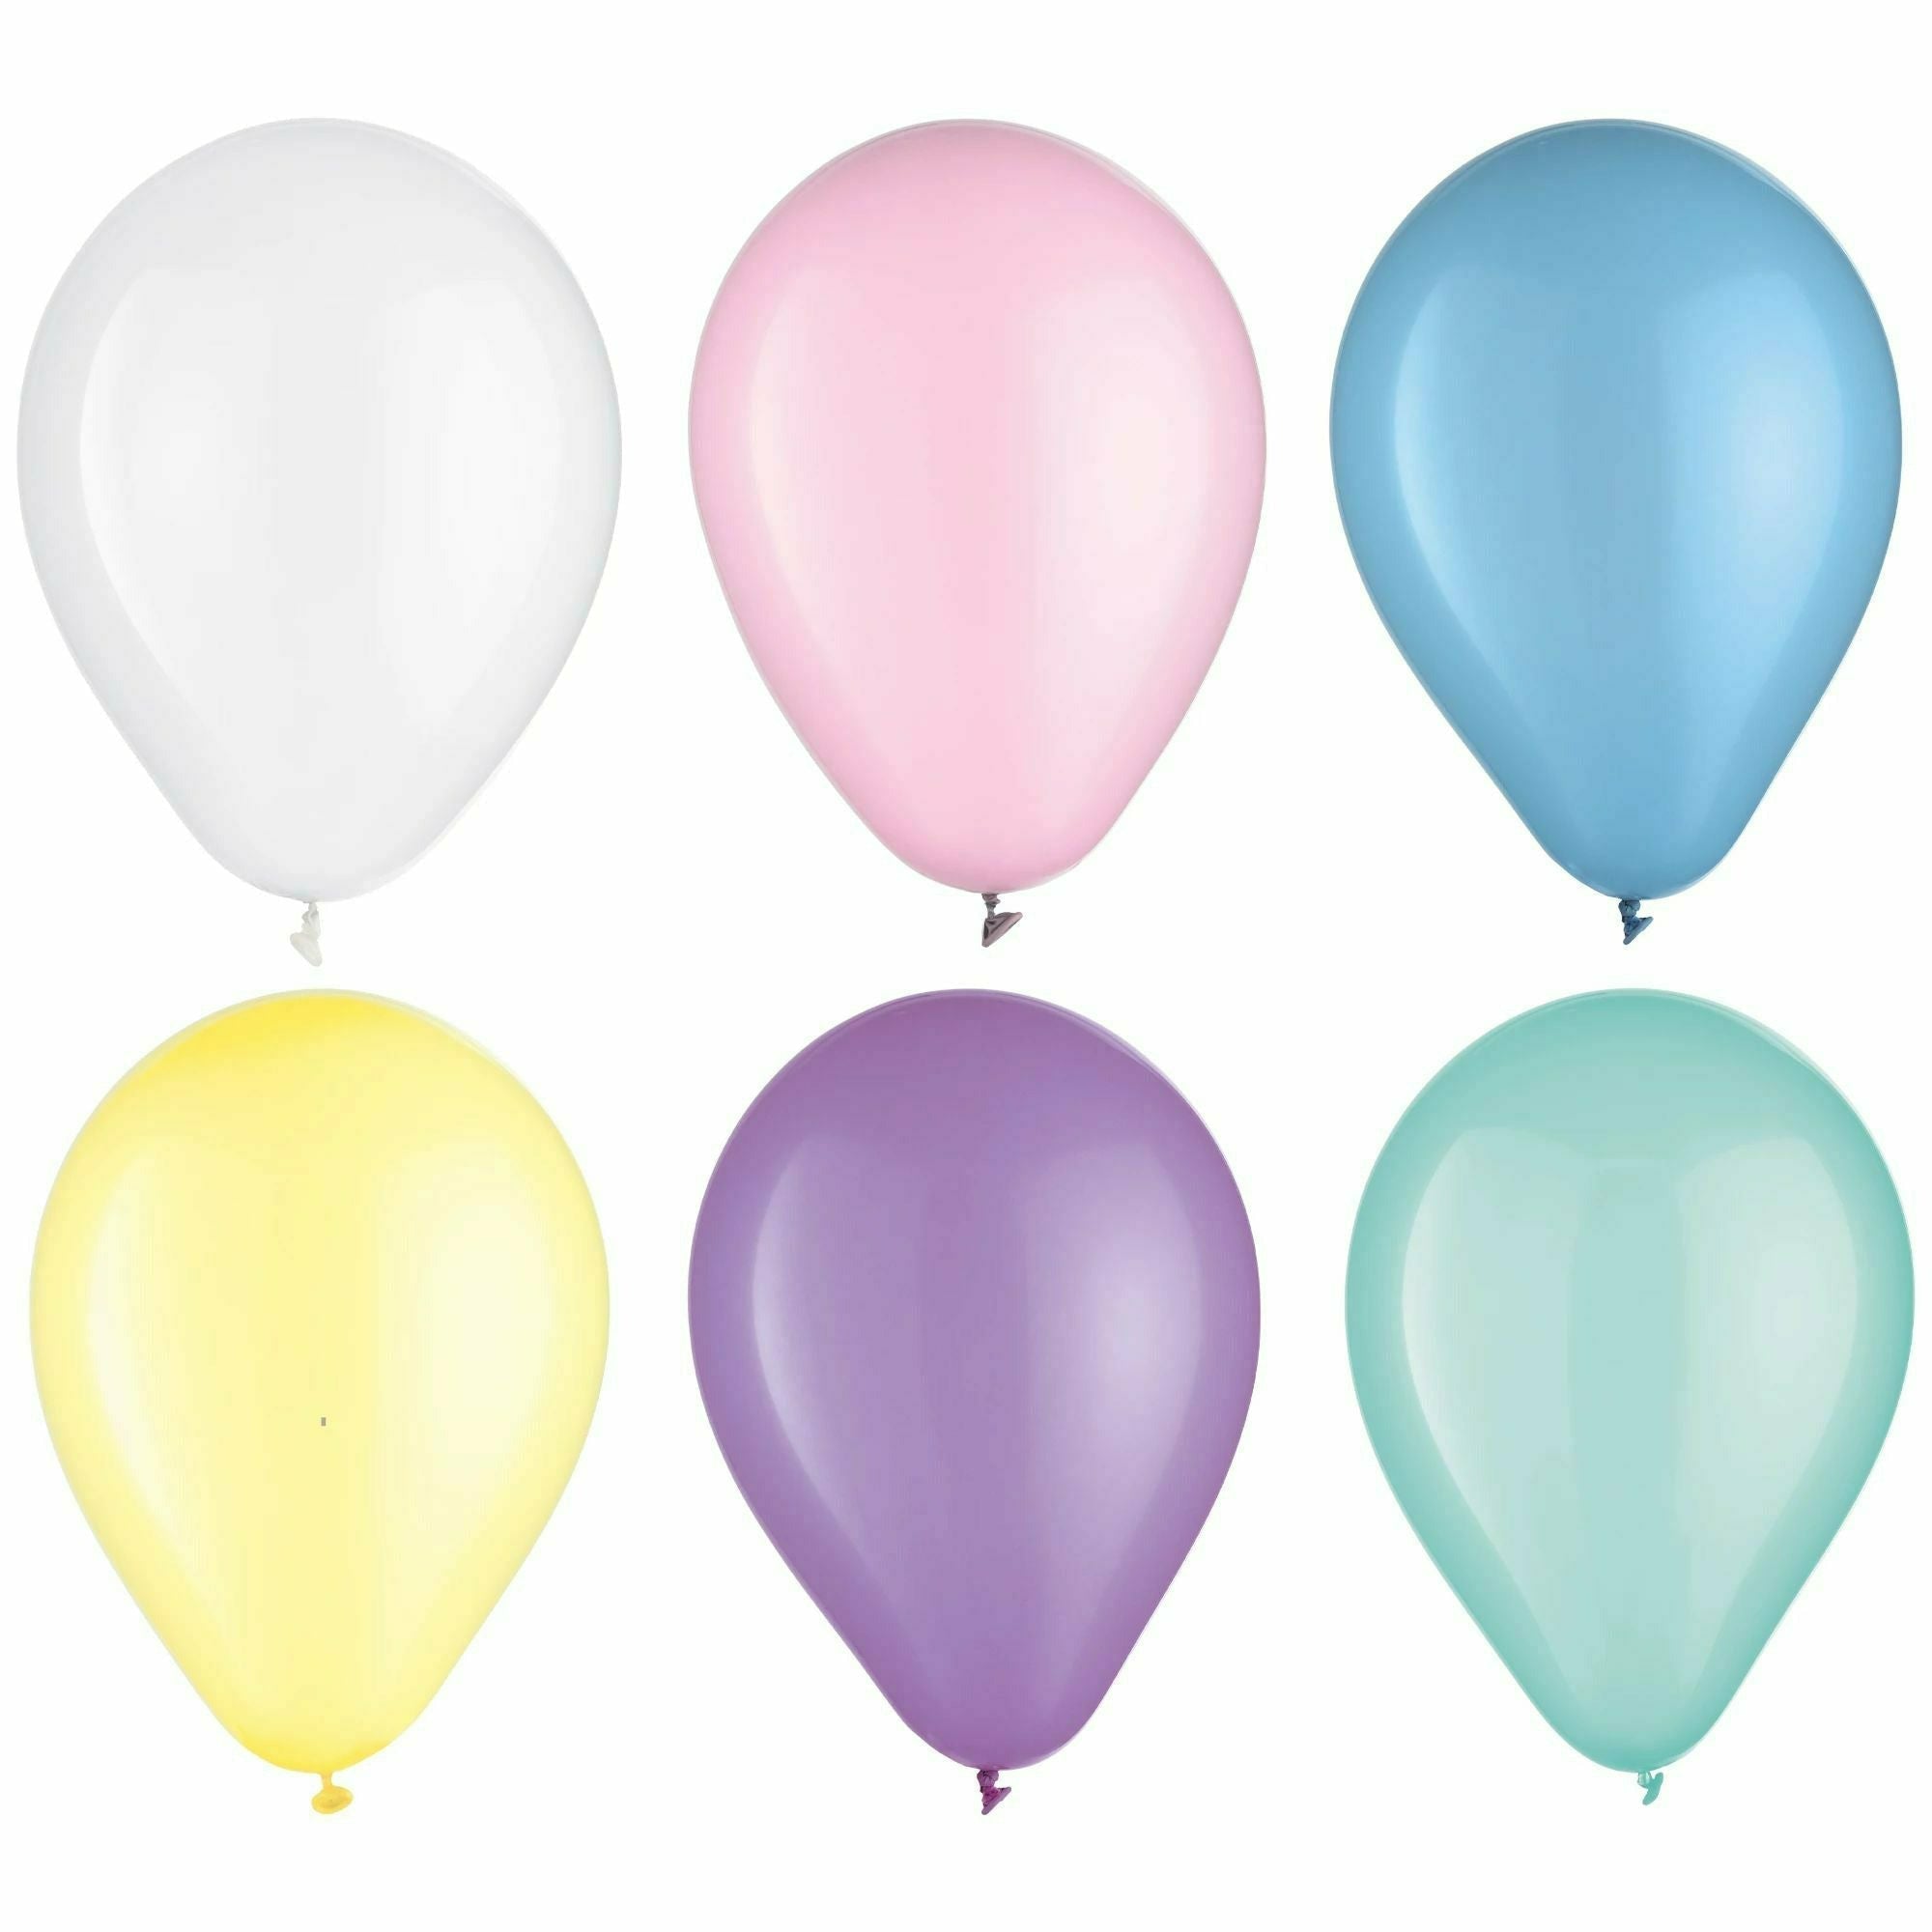 Amscan BALLOONS Pastel Assorted Latex Balloons - Packaged